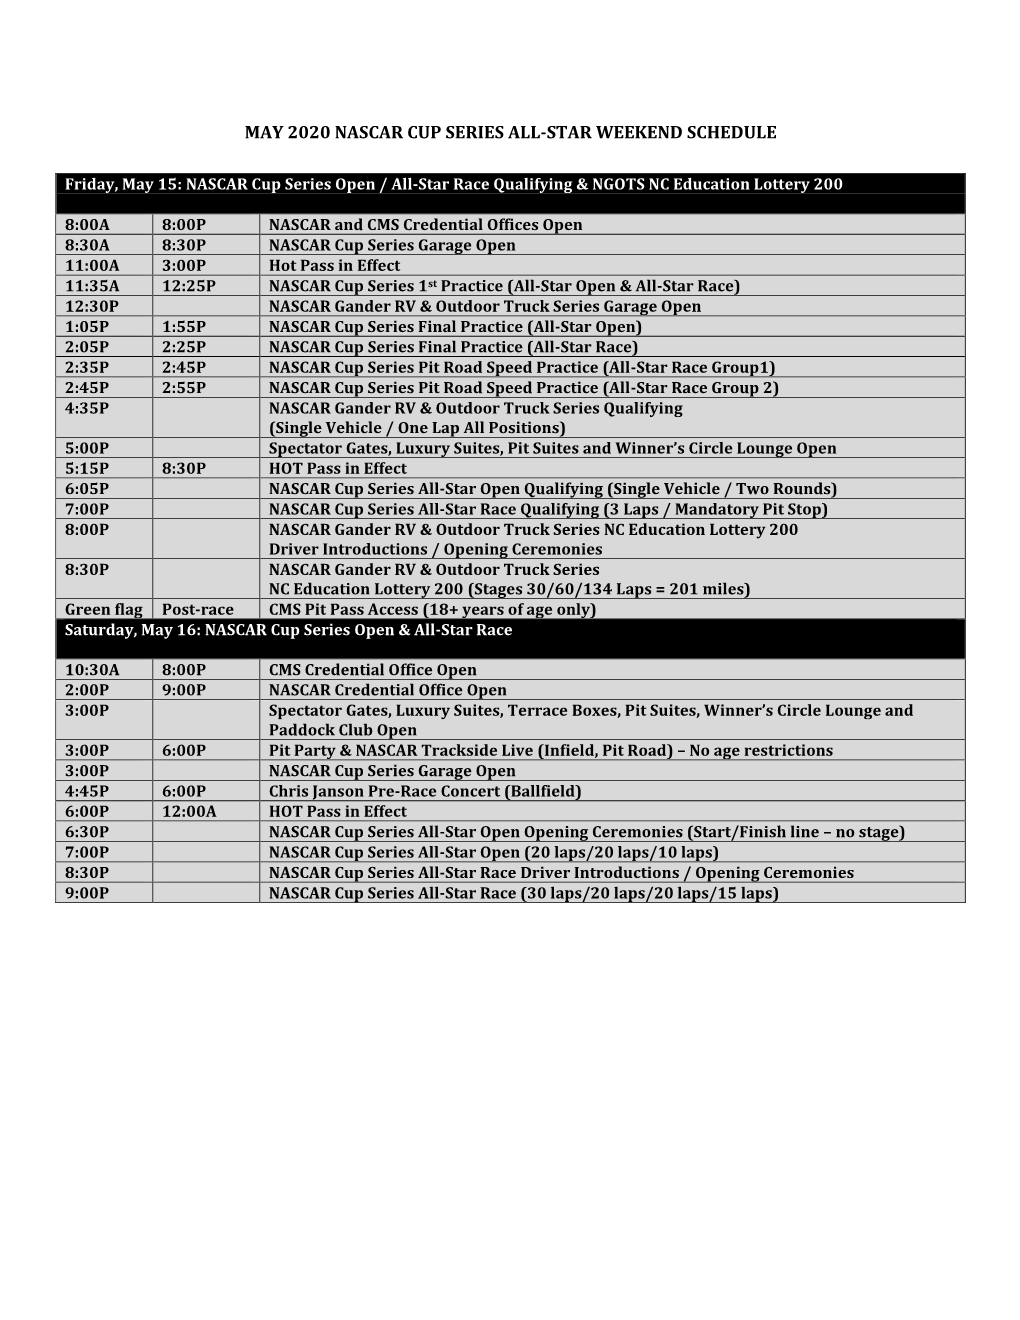 May 2020 Nascar Cup Series All-Star Weekend Schedule